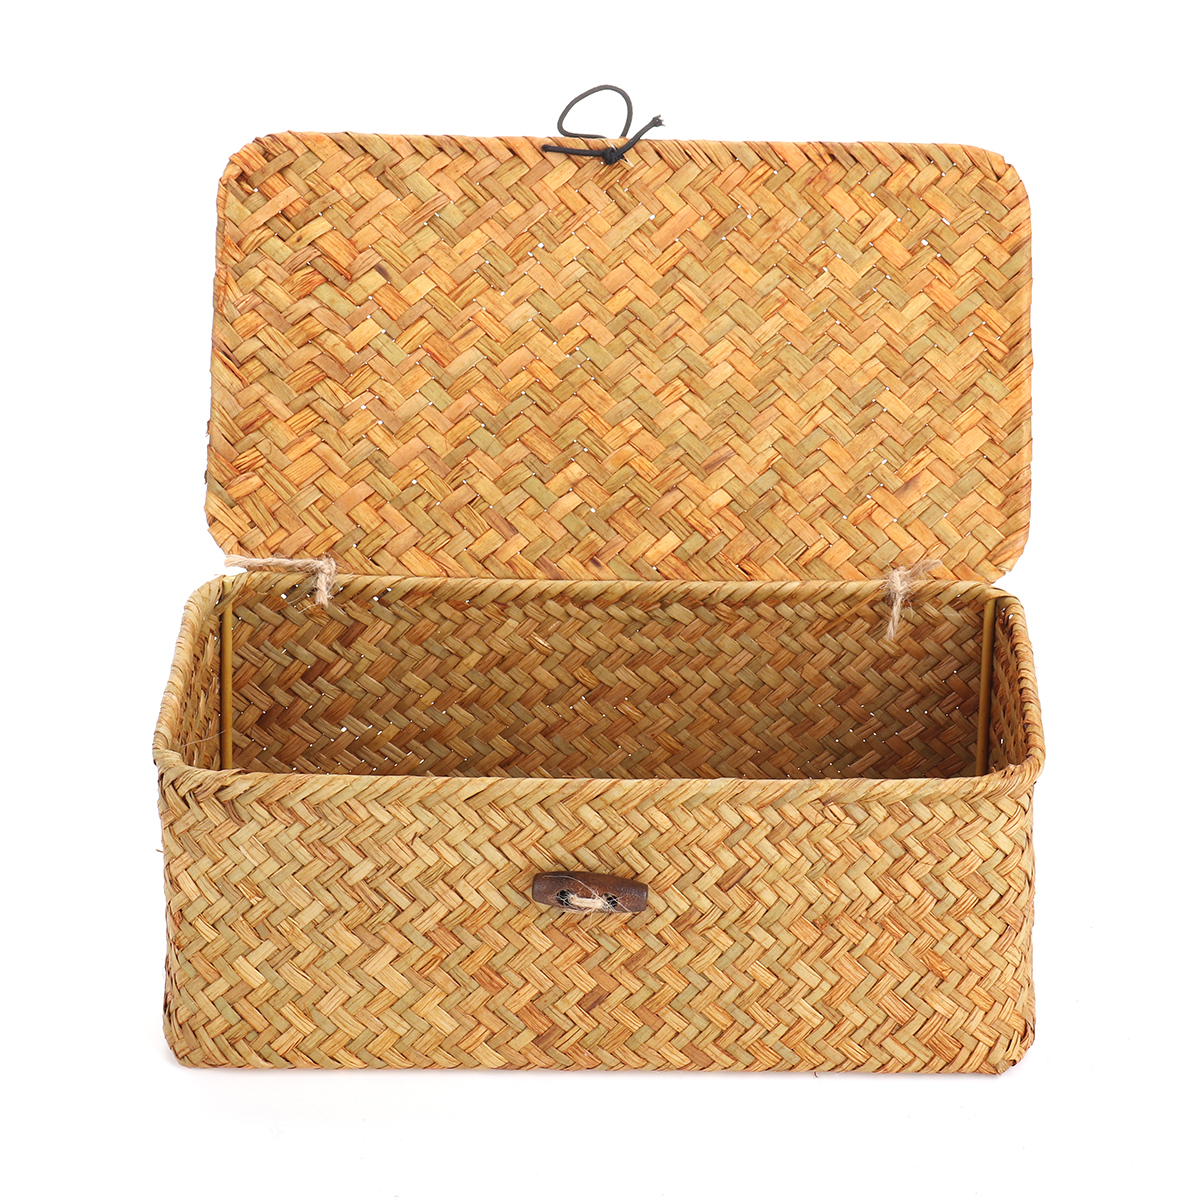 Storage-Box-Rectangular-Straw-Flower-Basket-with-Cover-Home-Garden-Fruit-Clothes-1748147-5